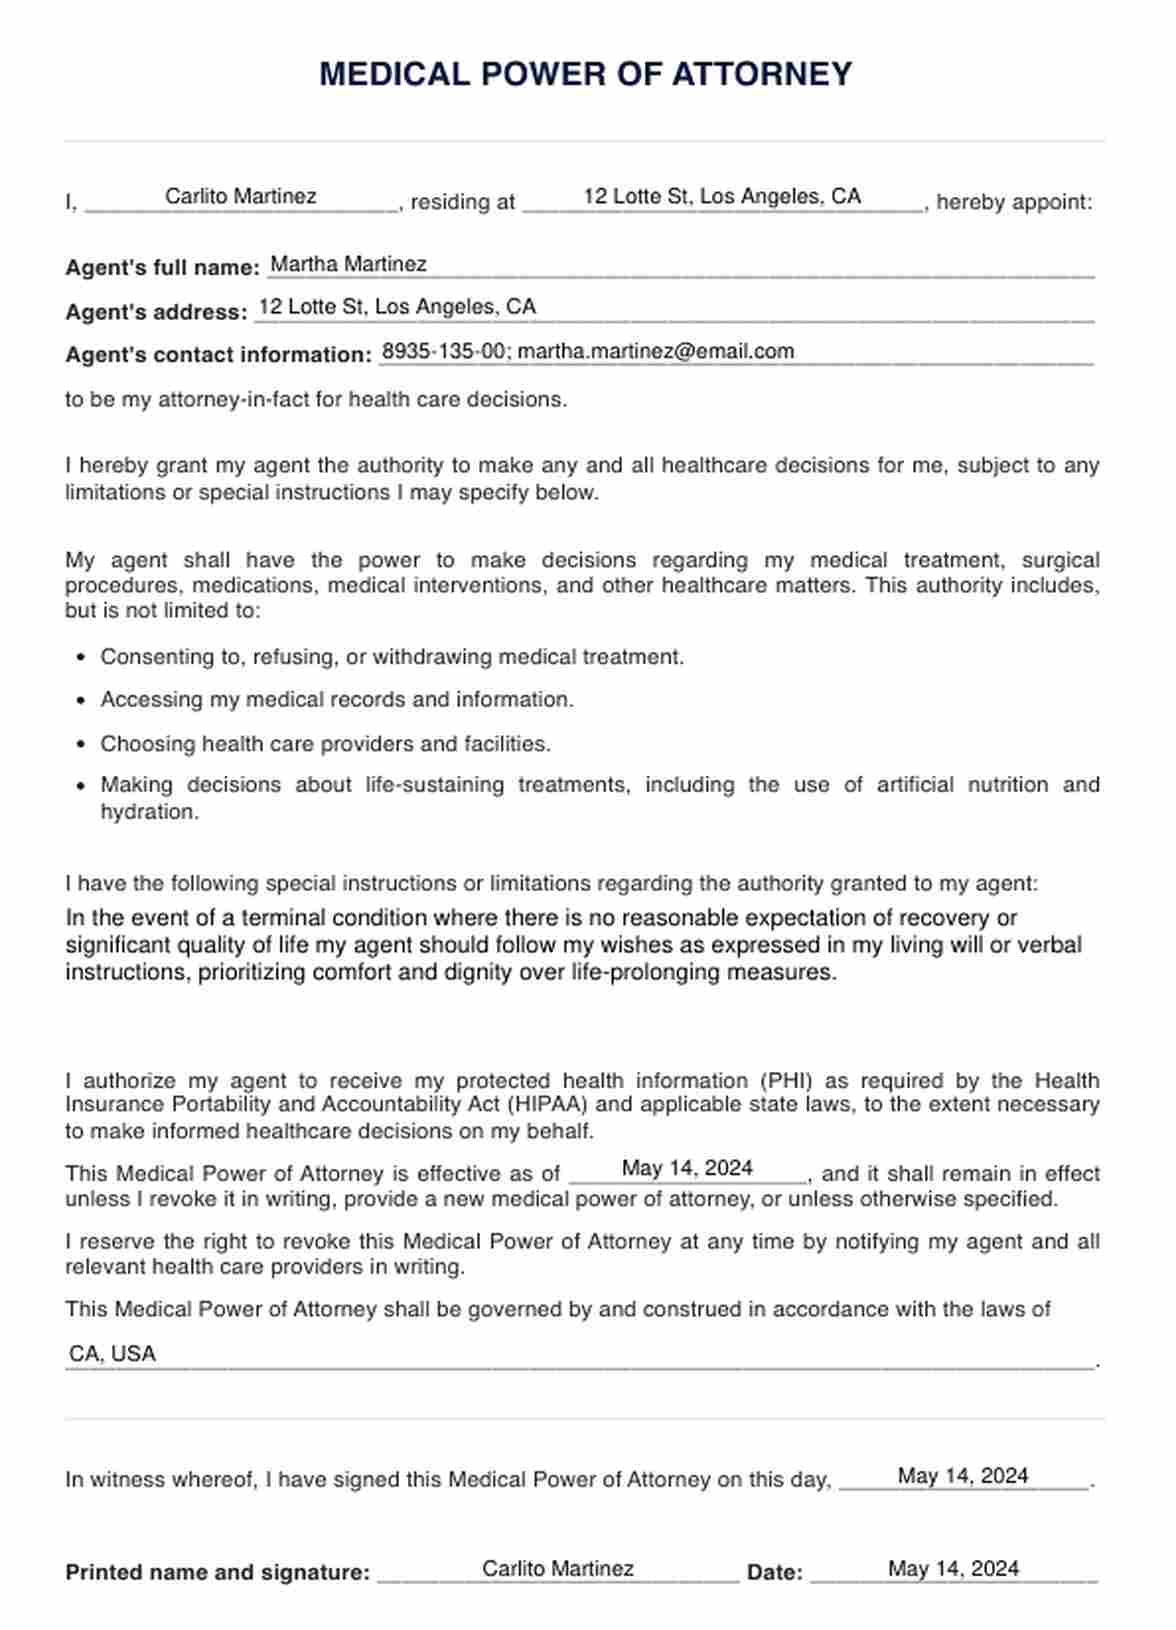 Medical Power of Attorney Form PDF Example